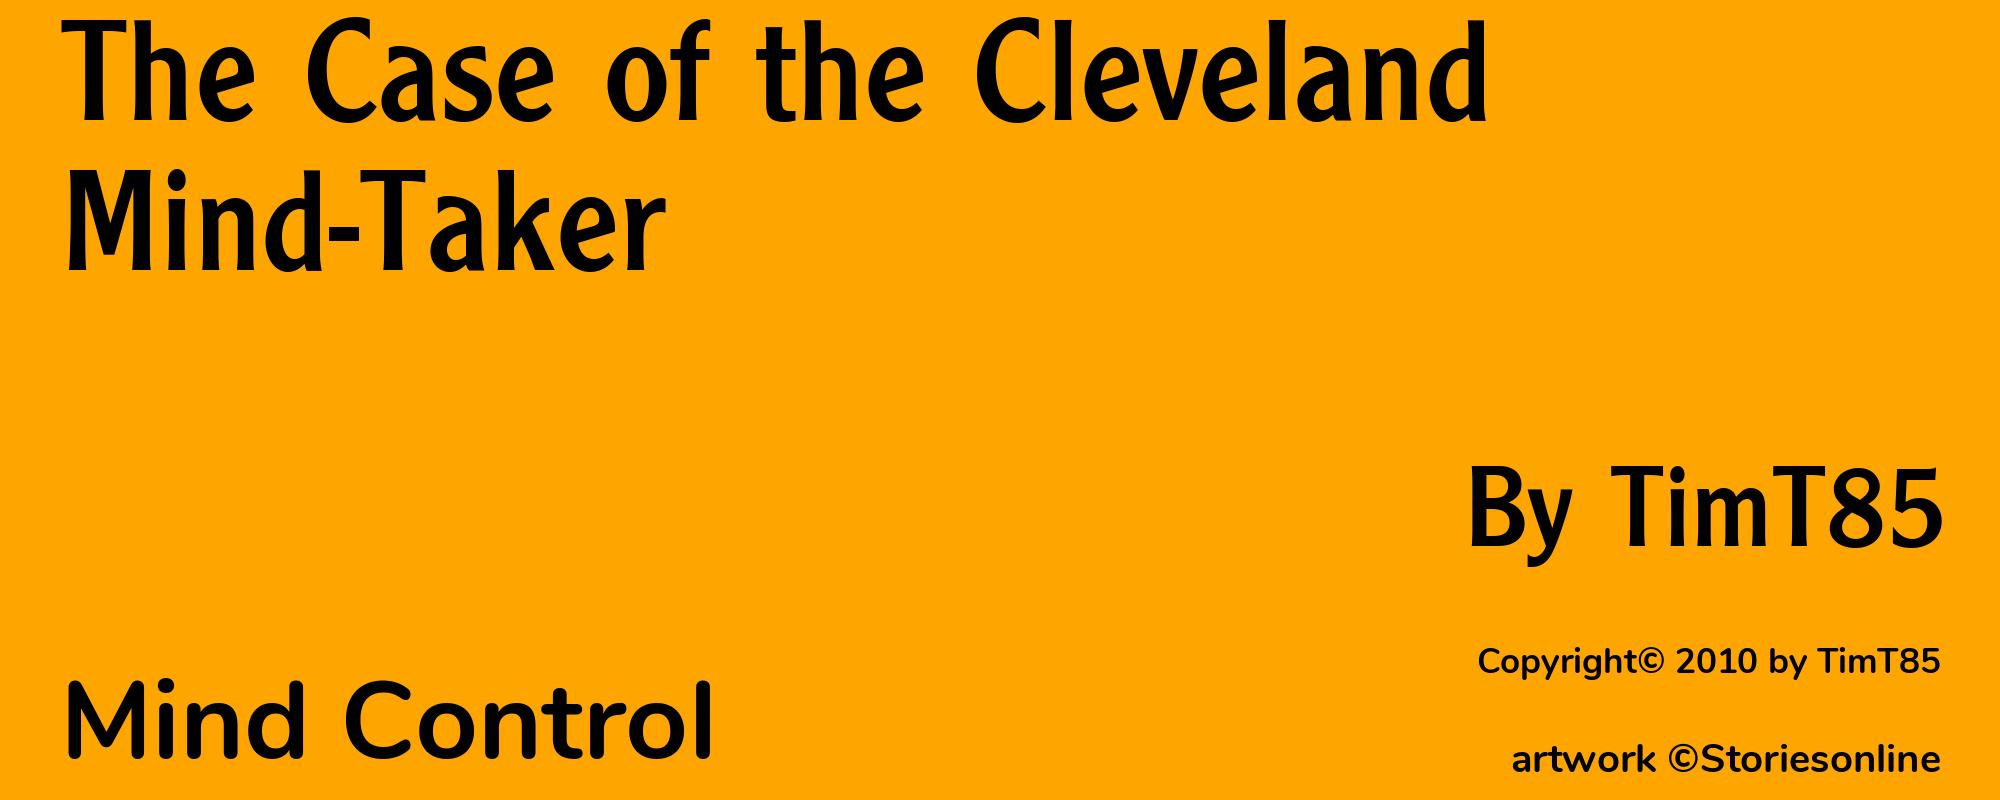 The Case of the Cleveland Mind-Taker - Cover